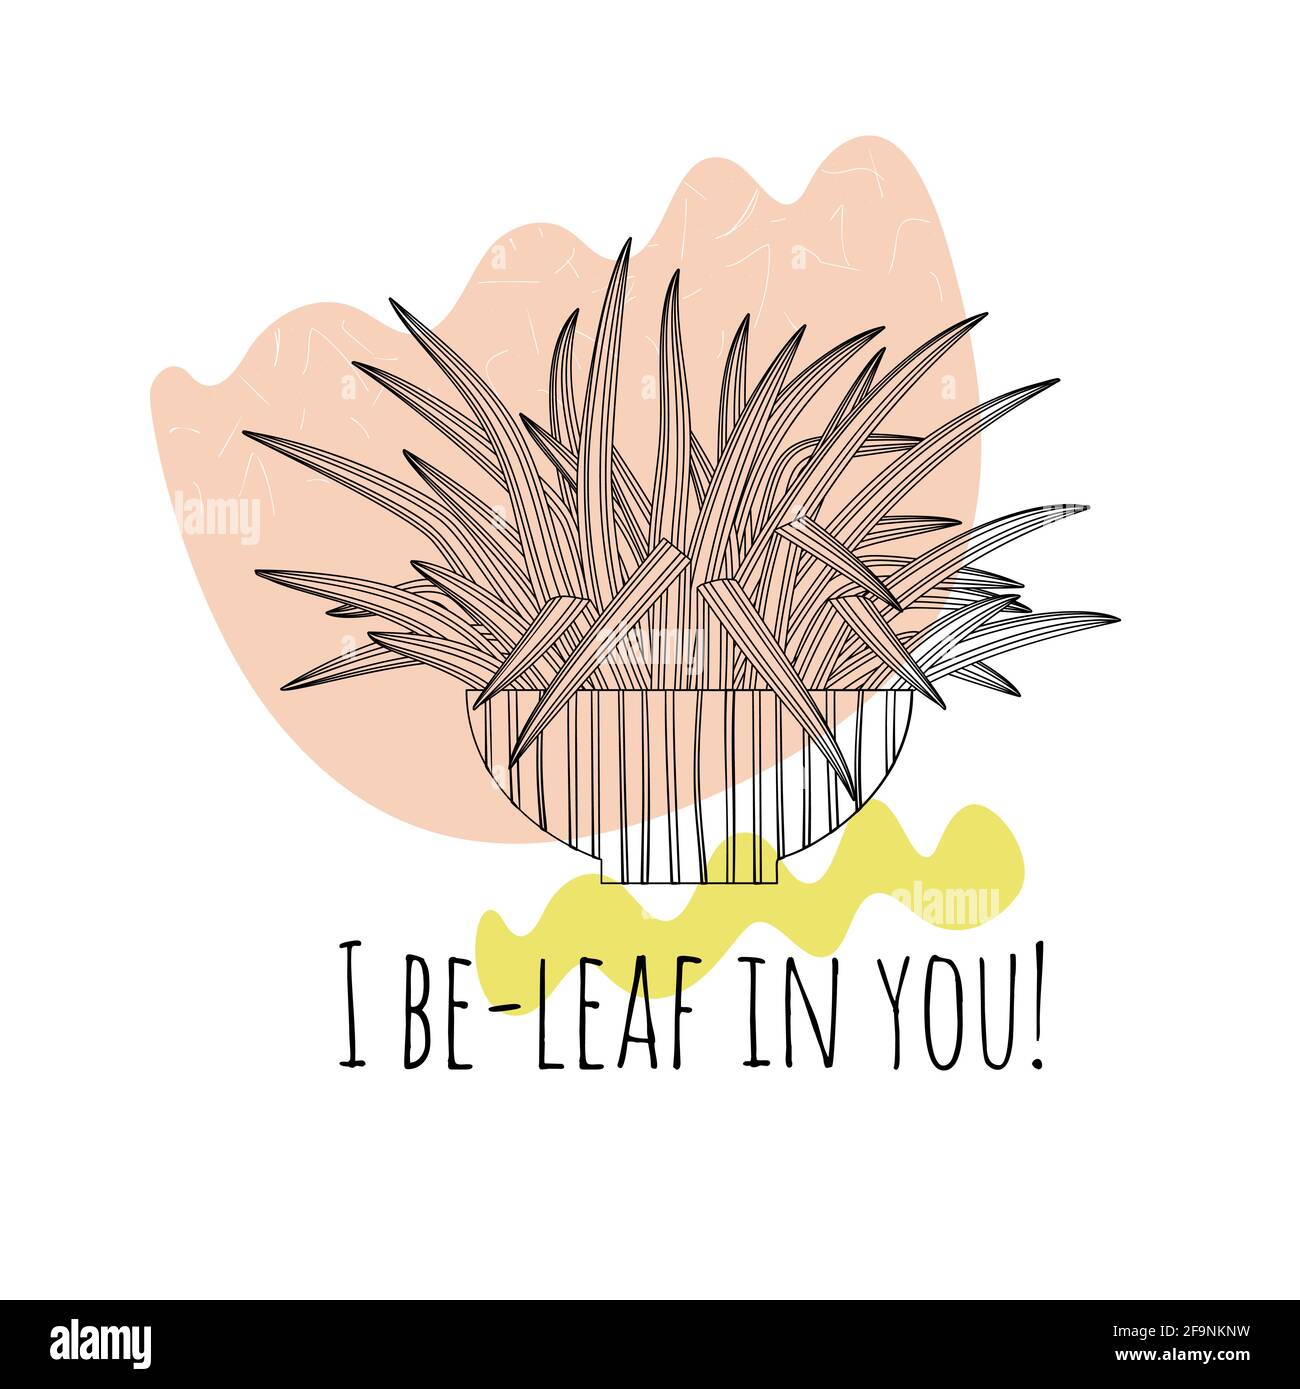 Minimalist boho illustration of funny quote I believe in you with black line art potted spider plant and abstract shapes Stock Vector